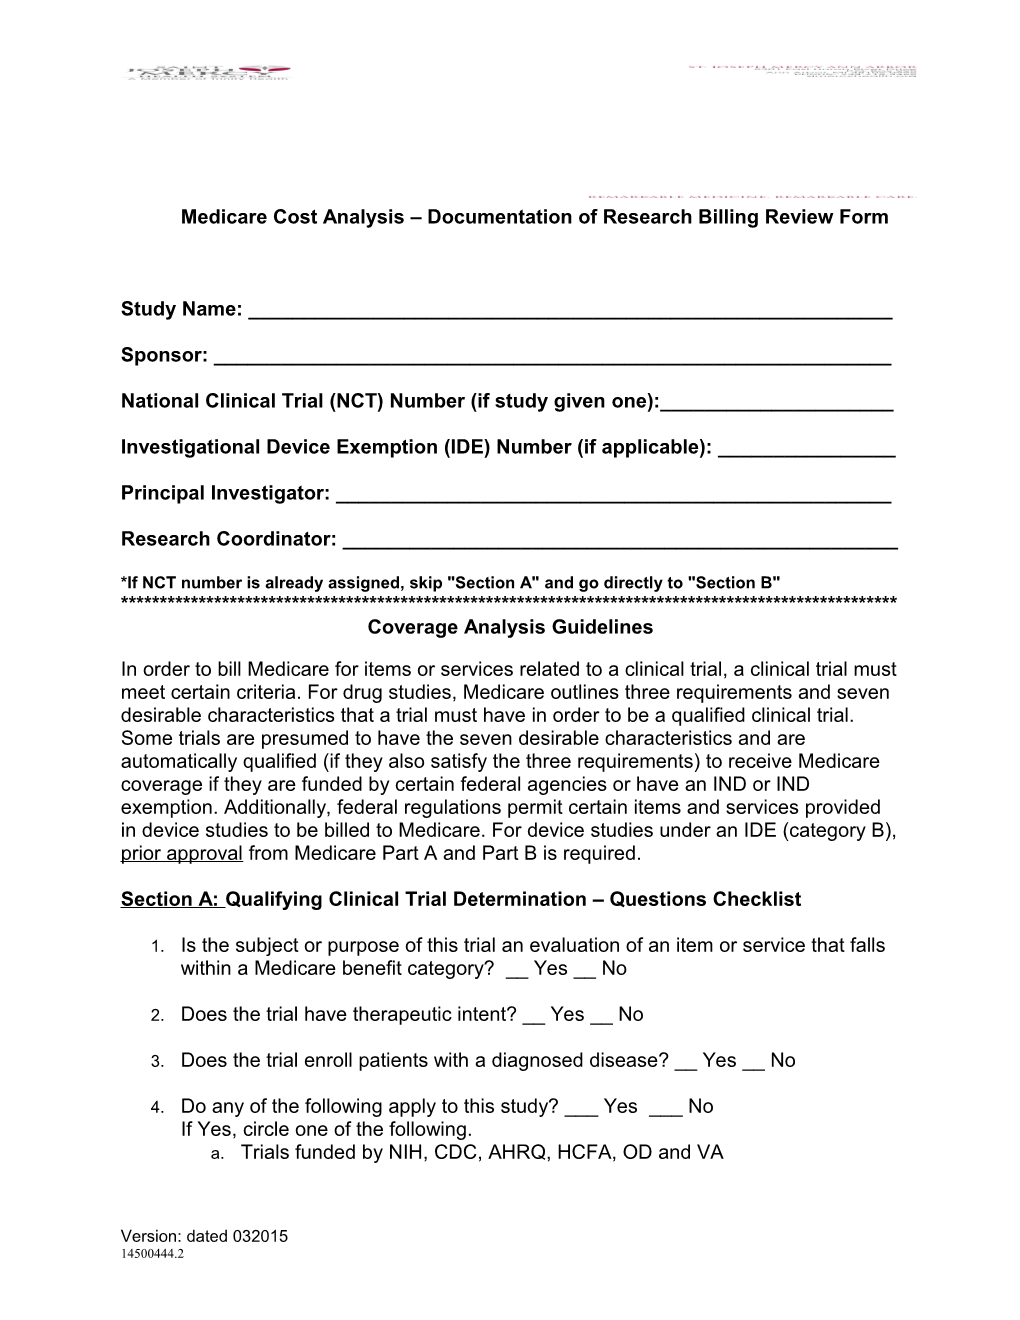 Medicare Cost Analysis Documentation of Research Billing Review Form